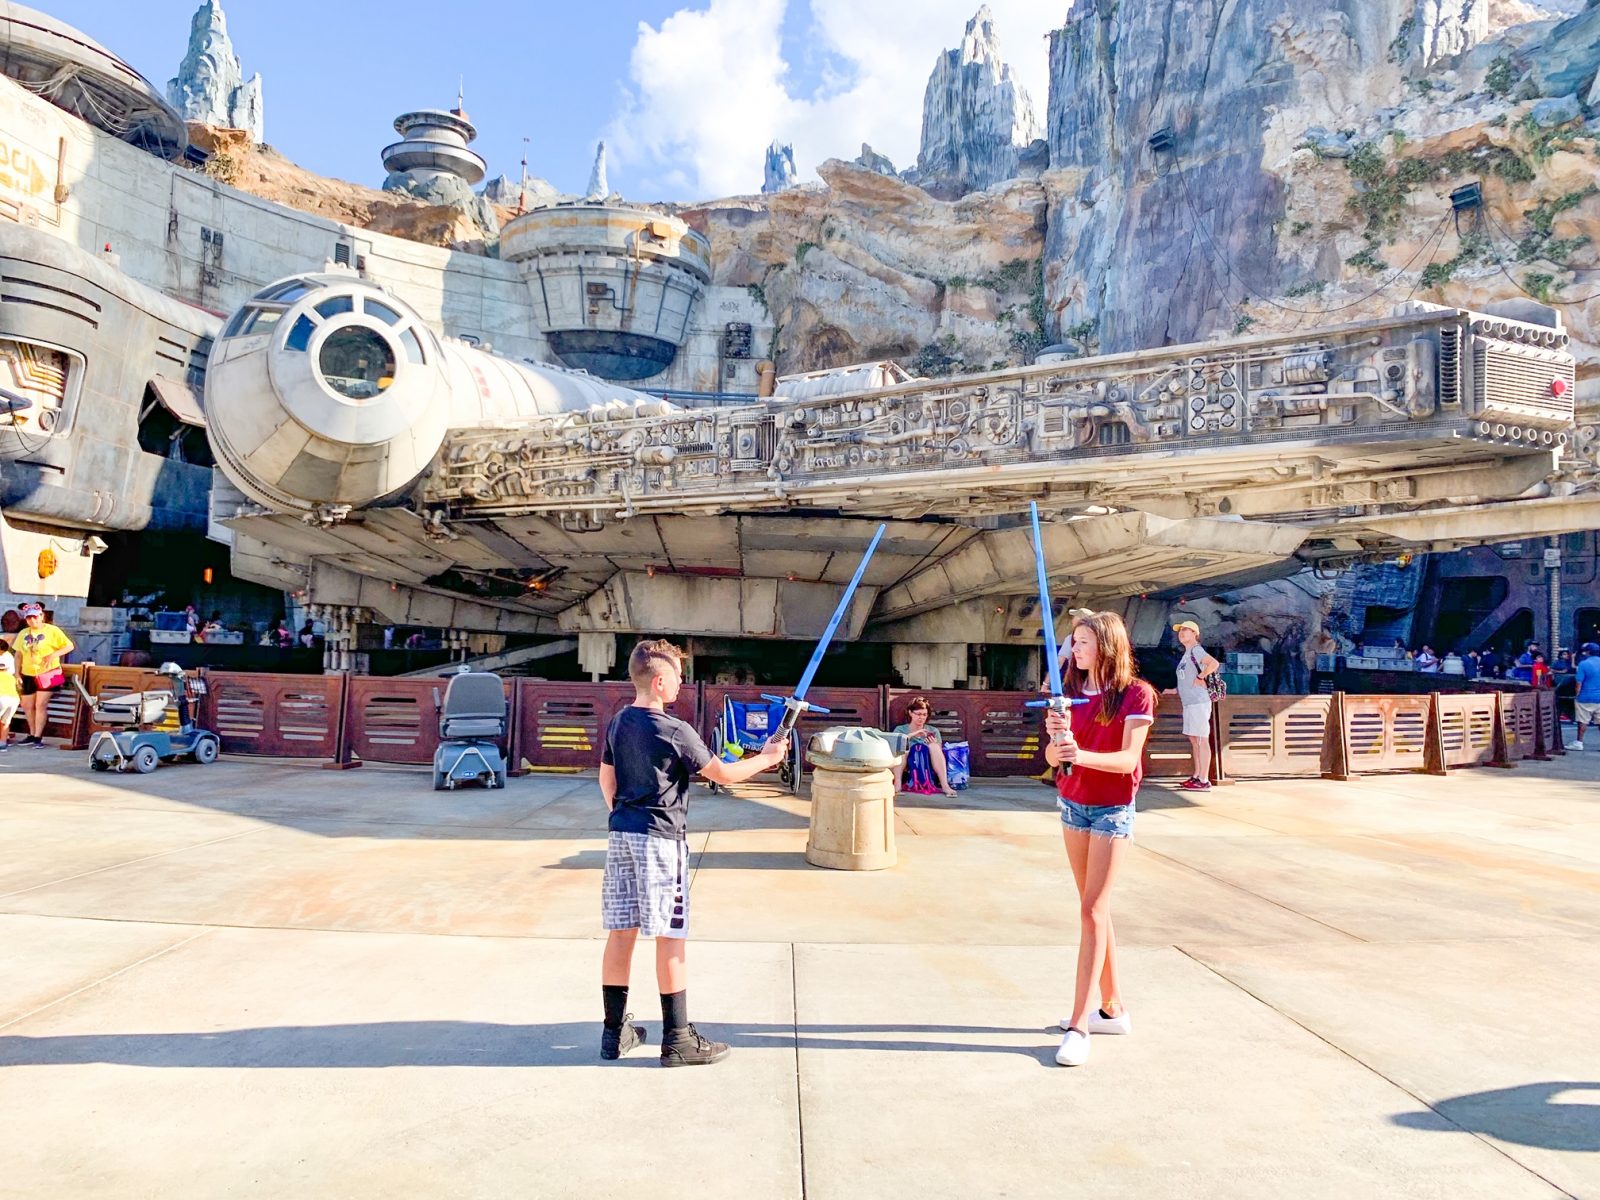 teens posing with lightsabers in front of the Millennium Falcon